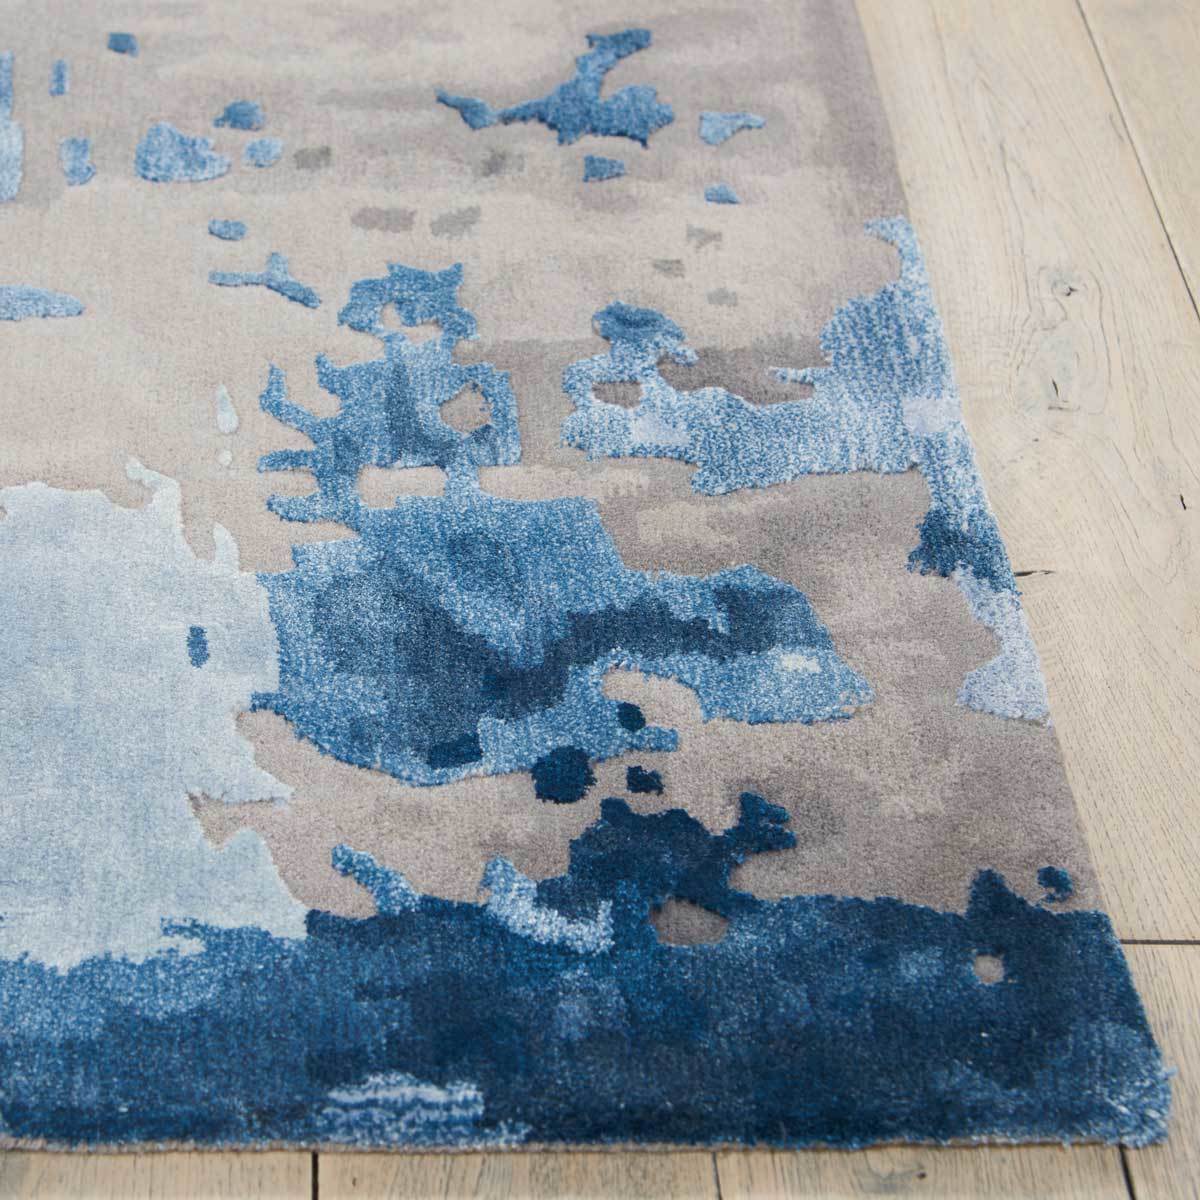 Close up image fo rug showing detailing